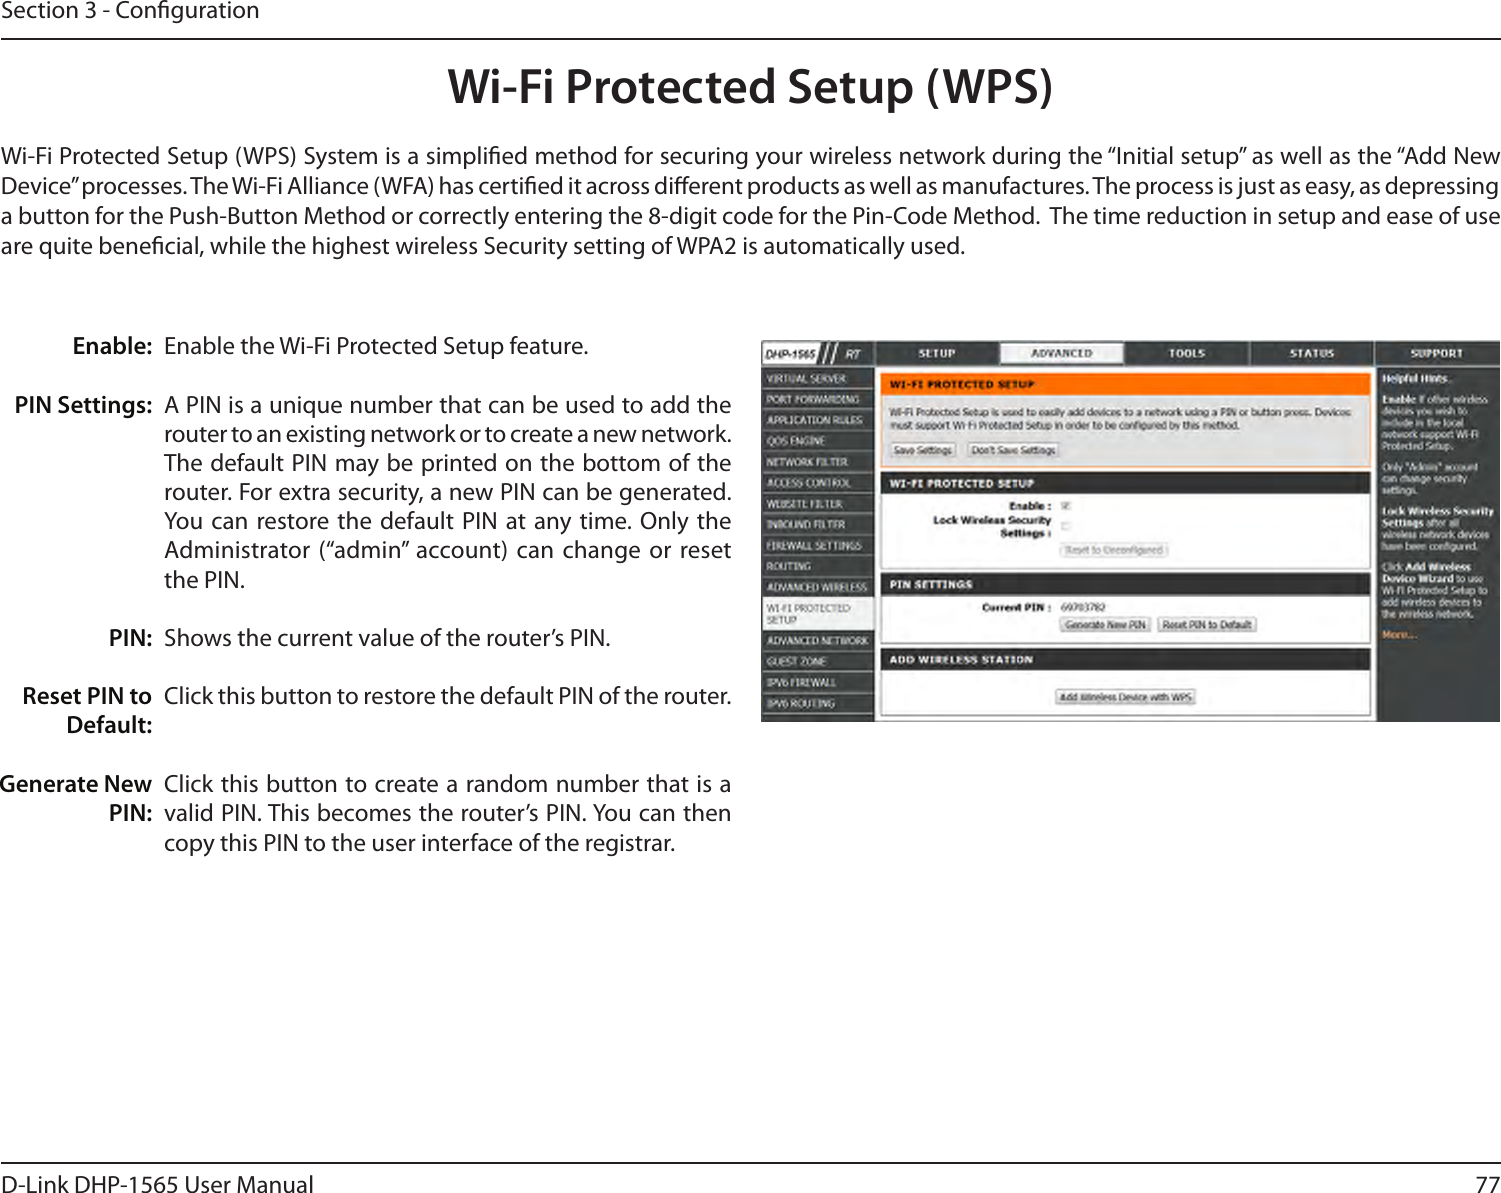 77D-Link DHP-1565 User ManualSection 3 - CongurationWi-Fi Protected Setup (WPS)Enable the Wi-Fi Protected Setup feature. A PIN is a unique number that can be used to add the router to an existing network or to create a new network. The default PIN may be printed on the bottom of the router. For extra security, a new PIN can be generated. You can restore the default PIN at any time. Only the Administrator (“admin” account) can change or reset the PIN. Shows the current value of the router’s PIN. Click this button to restore the default PIN of the router. Click this button to create a random number that is a valid PIN. This becomes the router’s PIN. You can then copy this PIN to the user interface of the registrar.Enable:PIN Settings: PIN:Reset PIN to Default:Generate New PIN:Wi-Fi Protected Setup (WPS) System is a simplied method for securing your wireless network during the “Initial setup” as well as the “Add New Device” processes. The Wi-Fi Alliance (WFA) has certied it across dierent products as well as manufactures. The process is just as easy, as depressing a button for the Push-Button Method or correctly entering the 8-digit code for the Pin-Code Method.  The time reduction in setup and ease of use are quite benecial, while the highest wireless Security setting of WPA2 is automatically used.